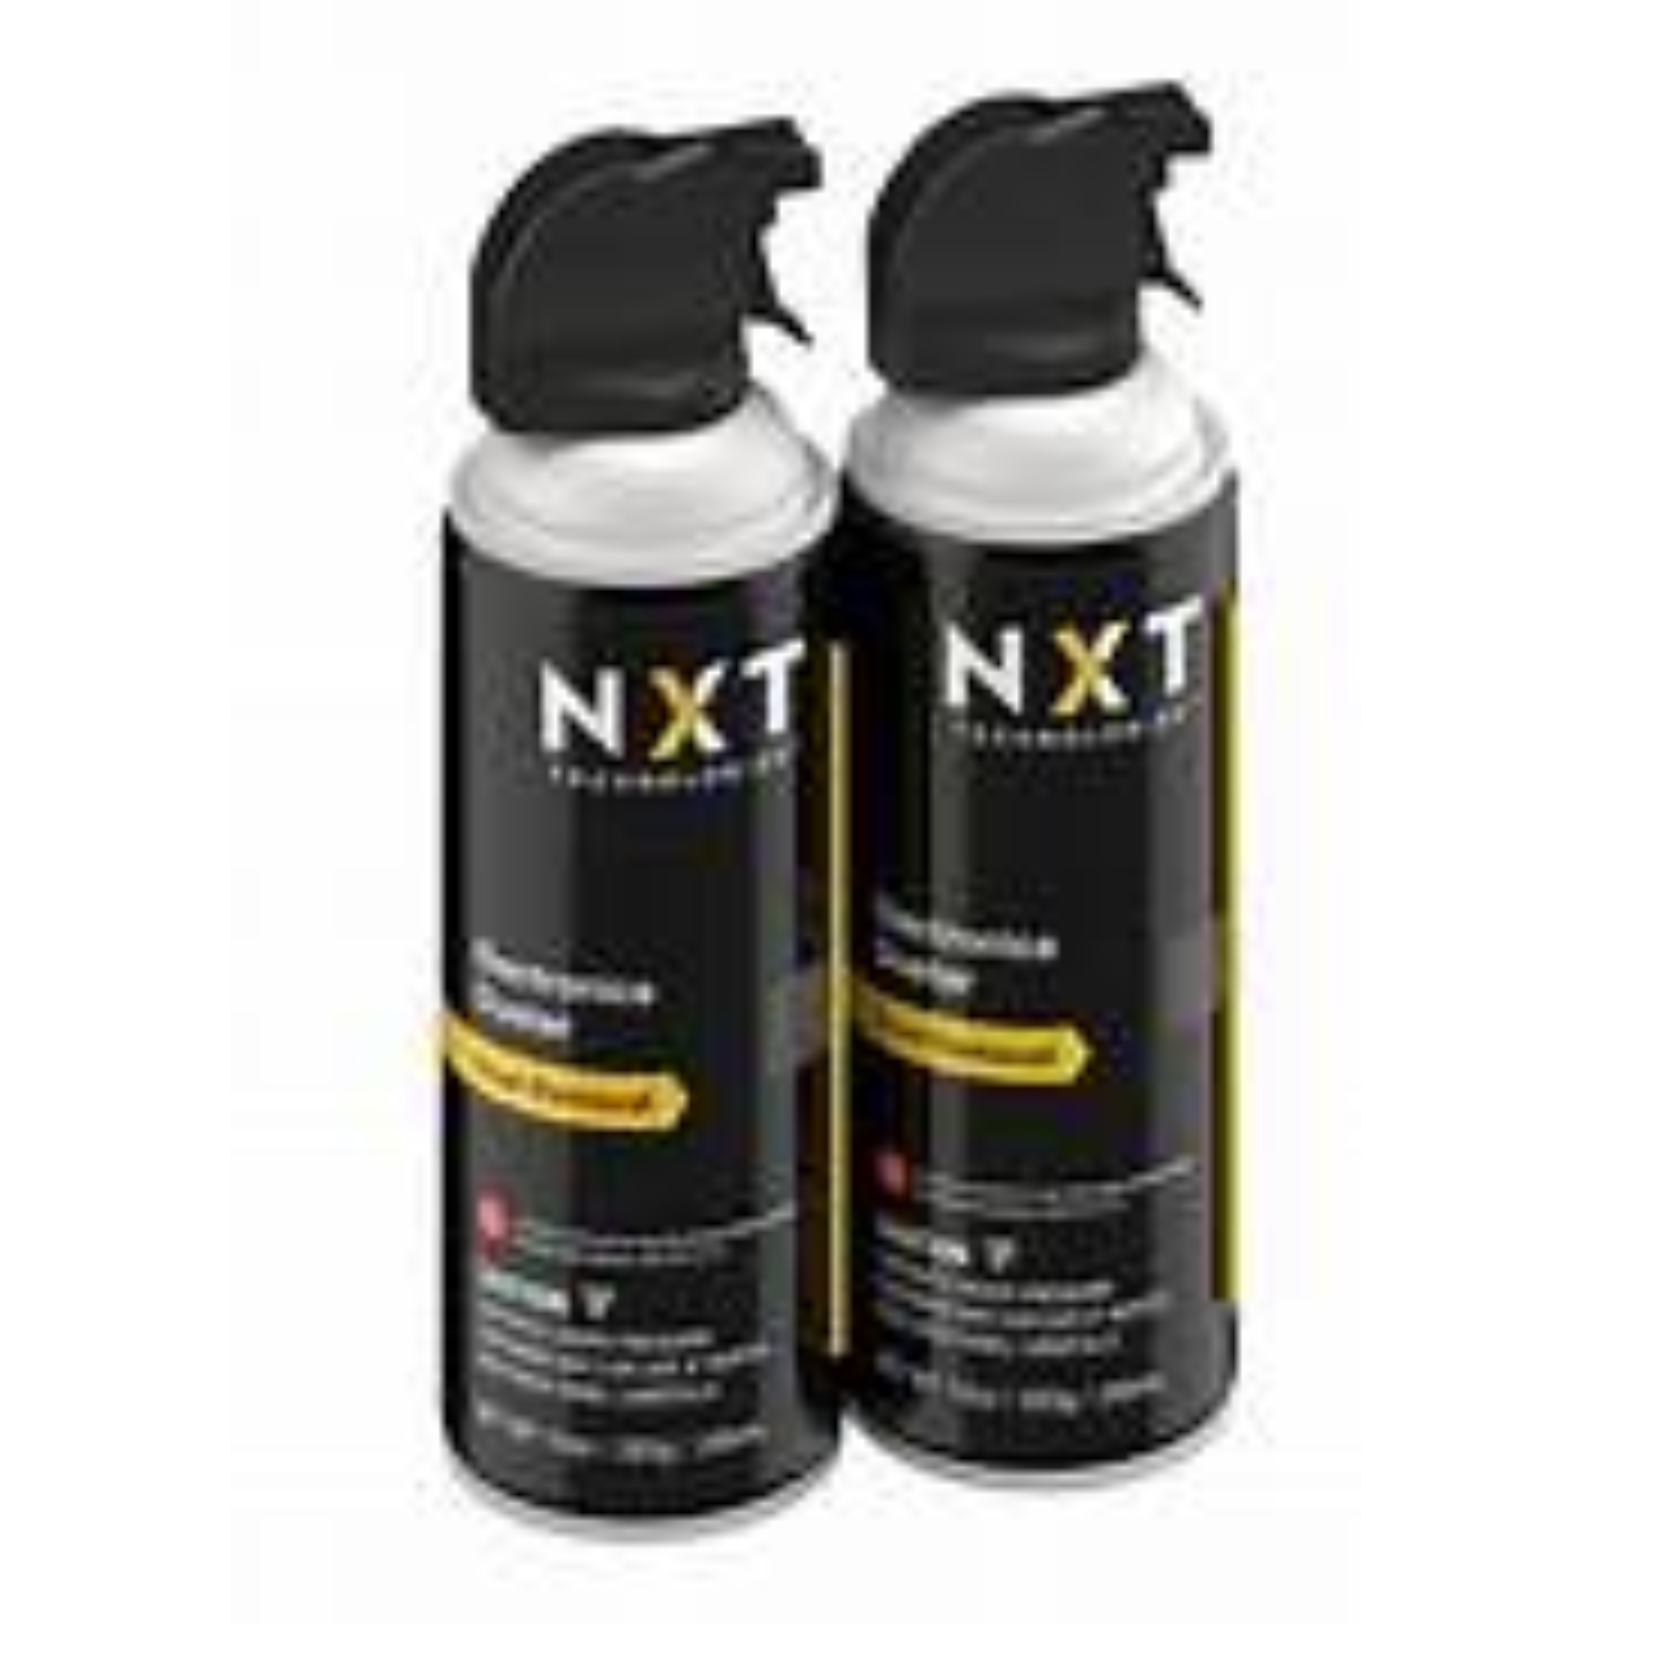 NXT Tech Electronics Compressed Air Duster 7oz